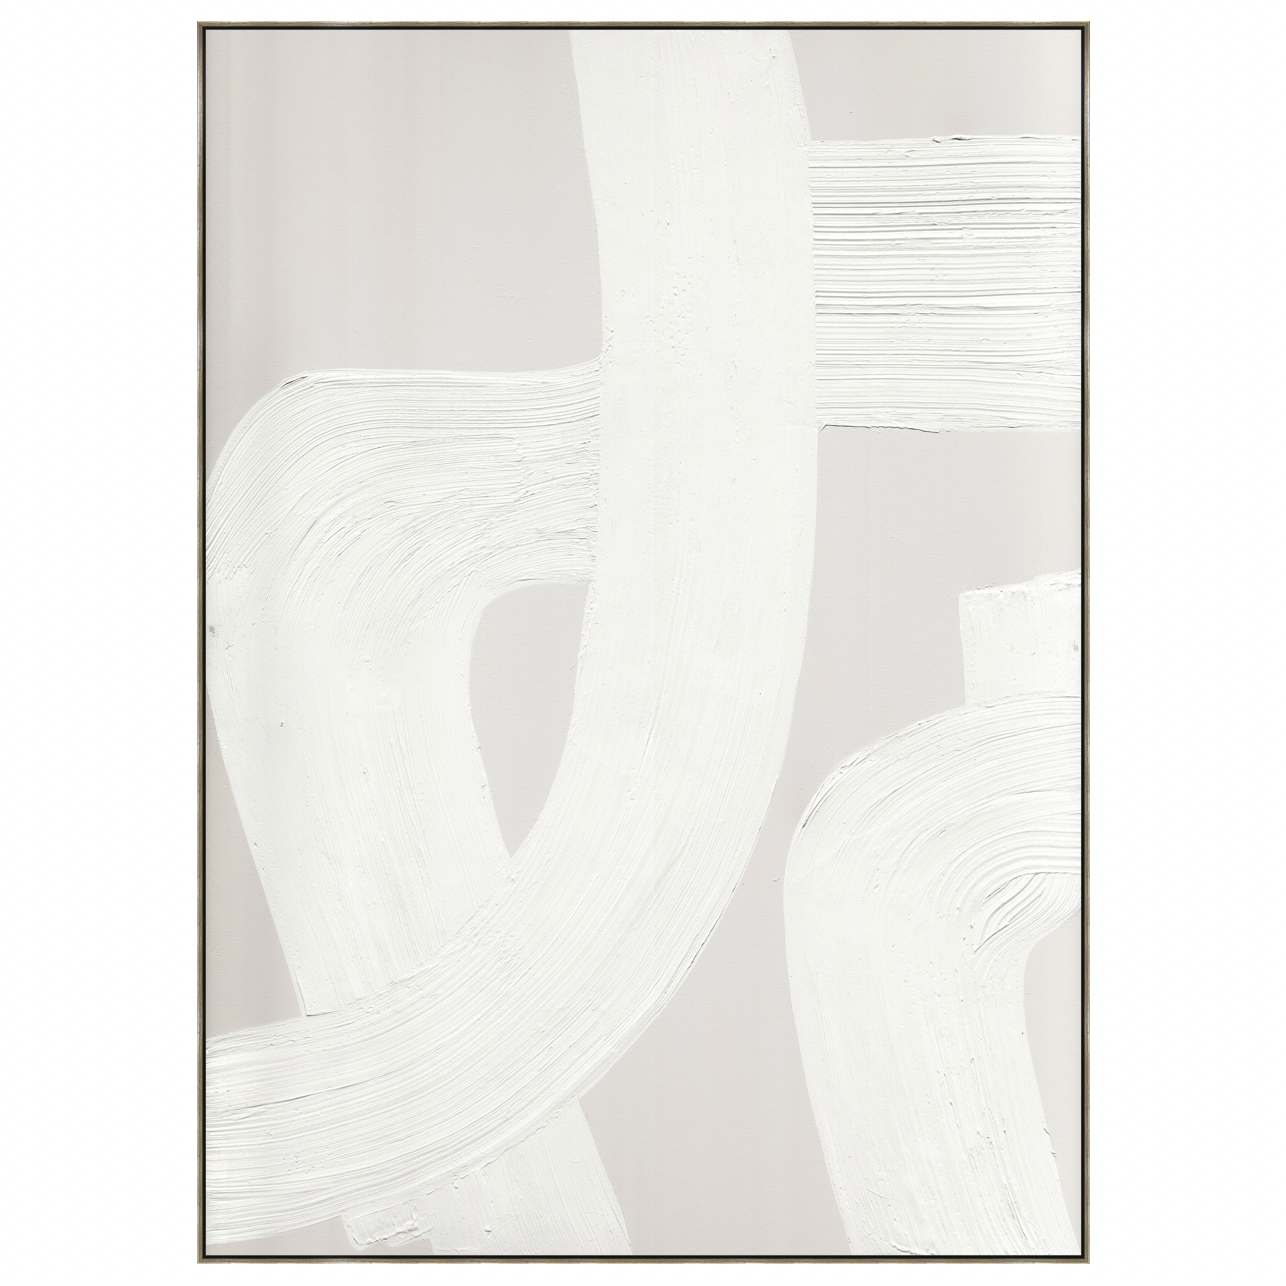 Clean and crispy with this New Neutral 1 Art. Pair with New Neutral 2 and wow your guests!  Size: 51" x 71" Medium: Canvas Specialty: Hand Painted on Gallery Wrapped Canvas